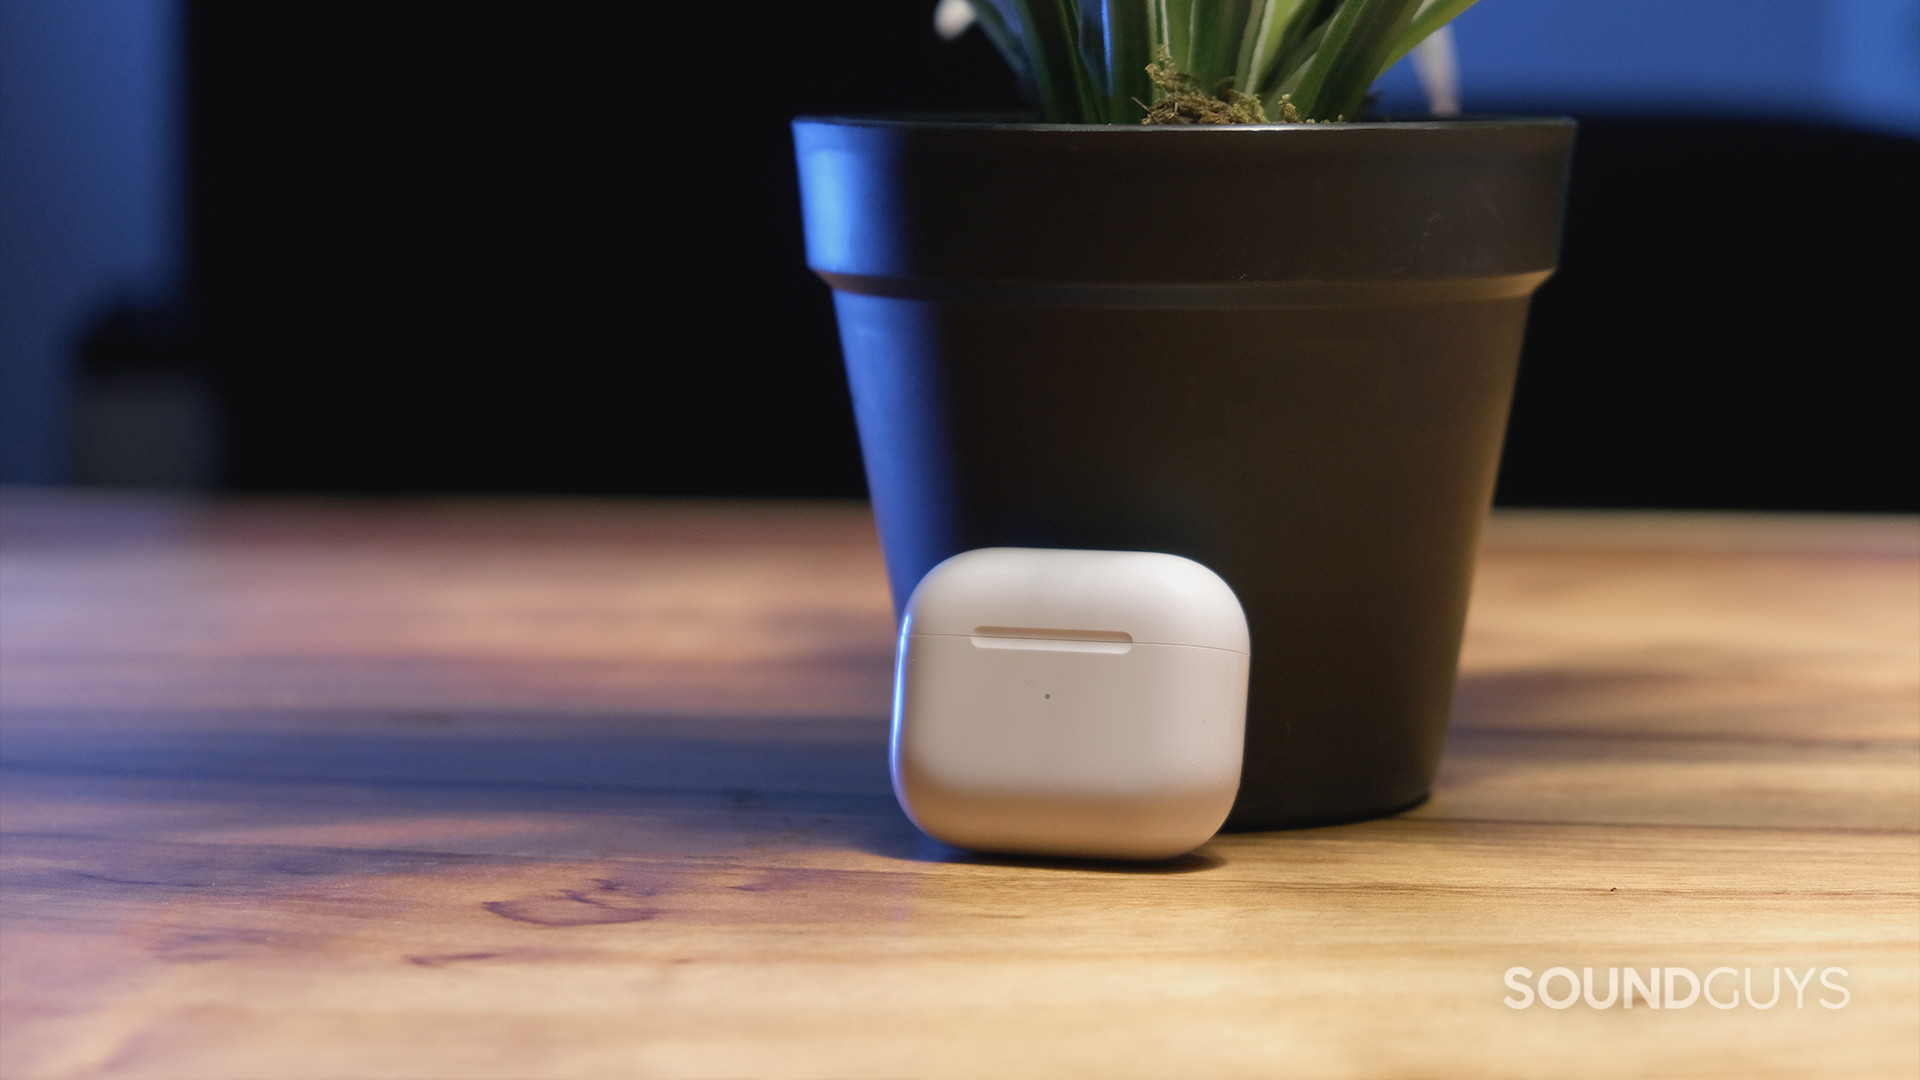 The Apple AirPods (3rd generation) closed case rests against a potted plant on top of a wooden table.